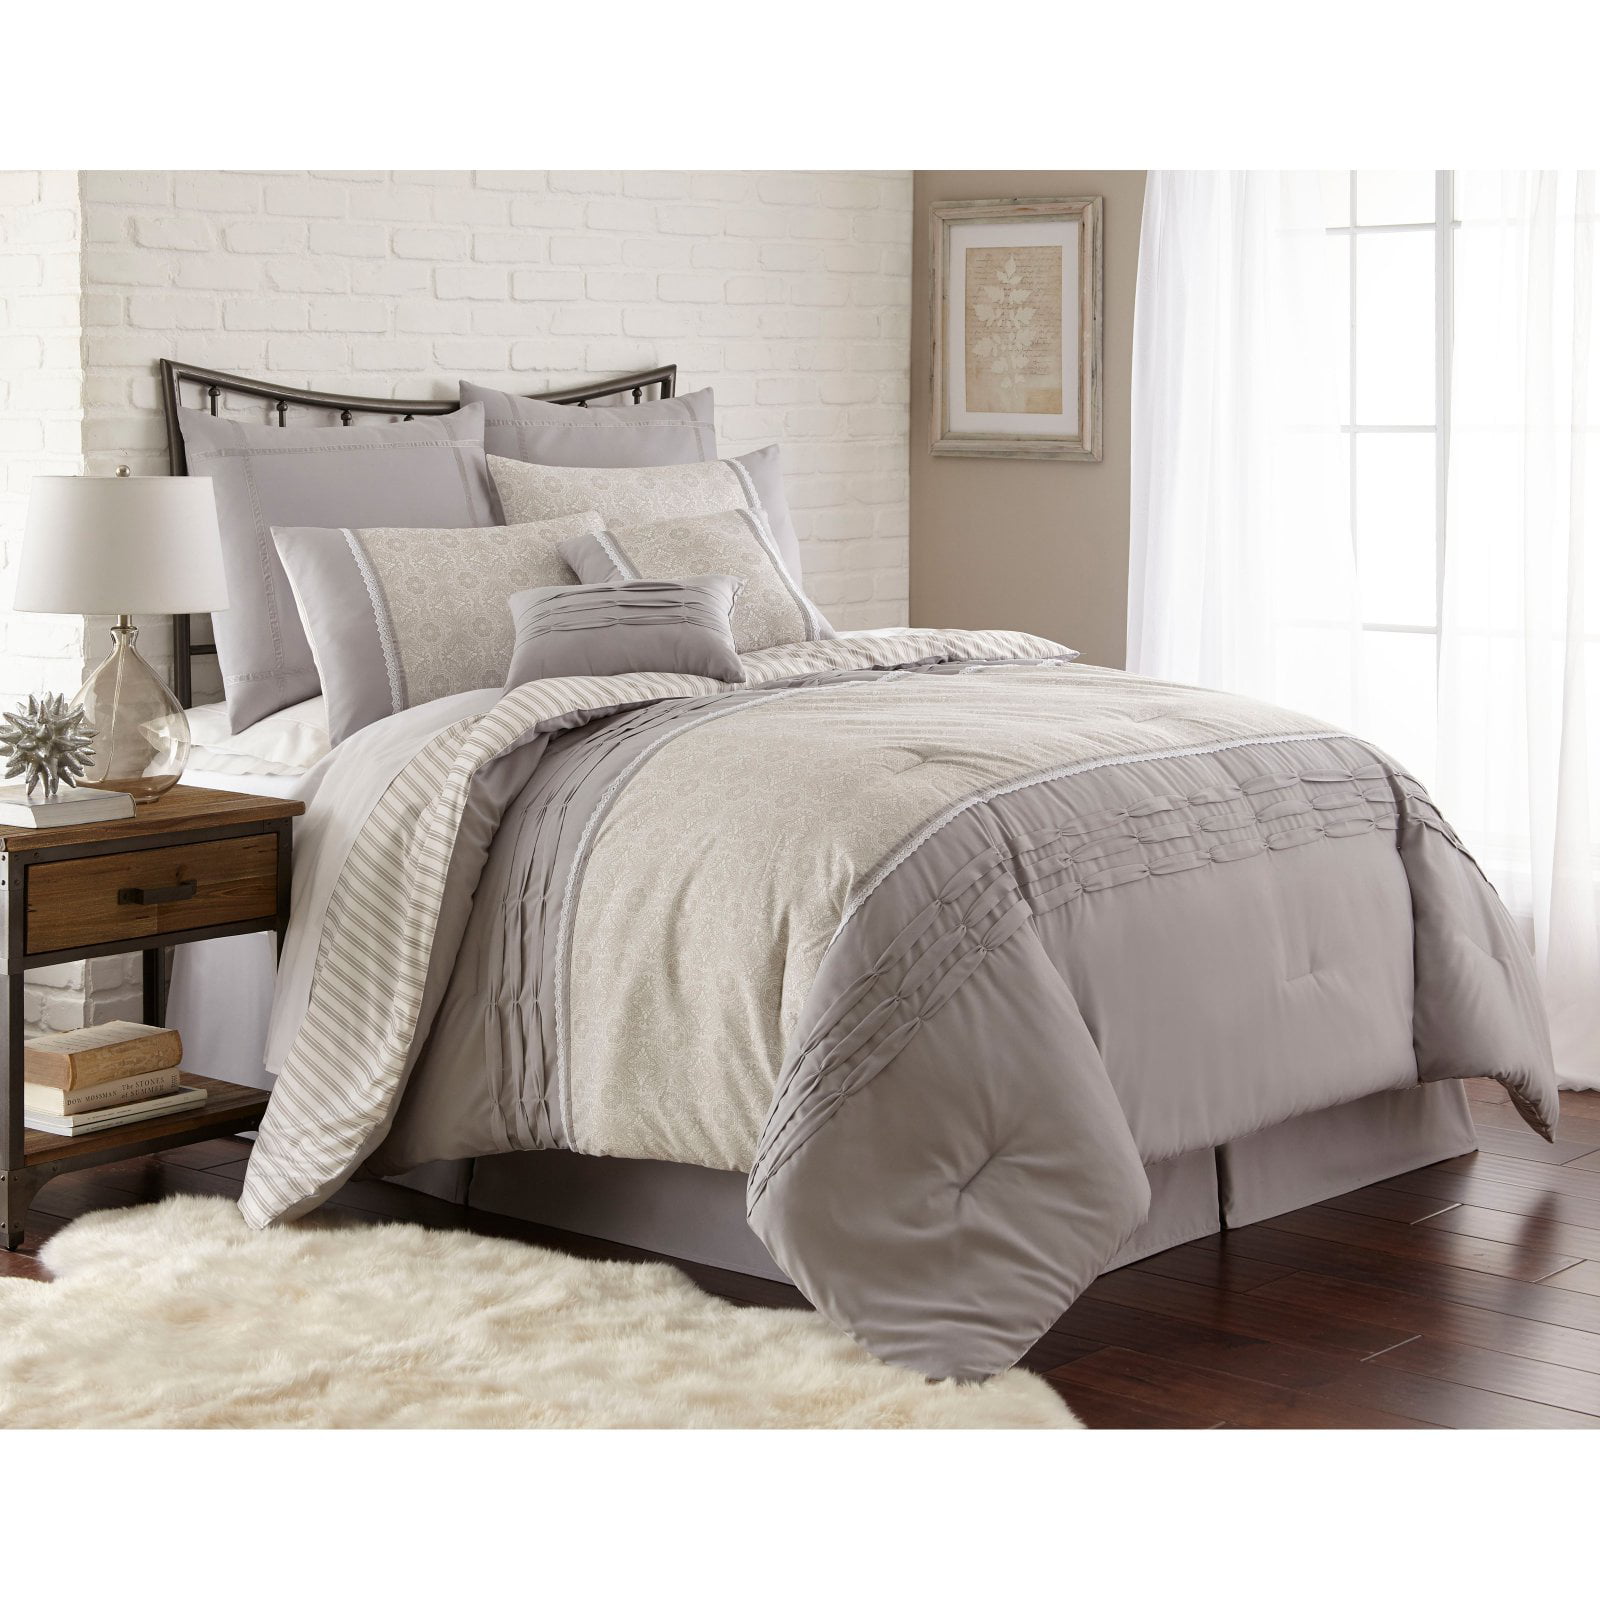 Camilia Romantic Country Cottage Bedding Collection by April & Olive